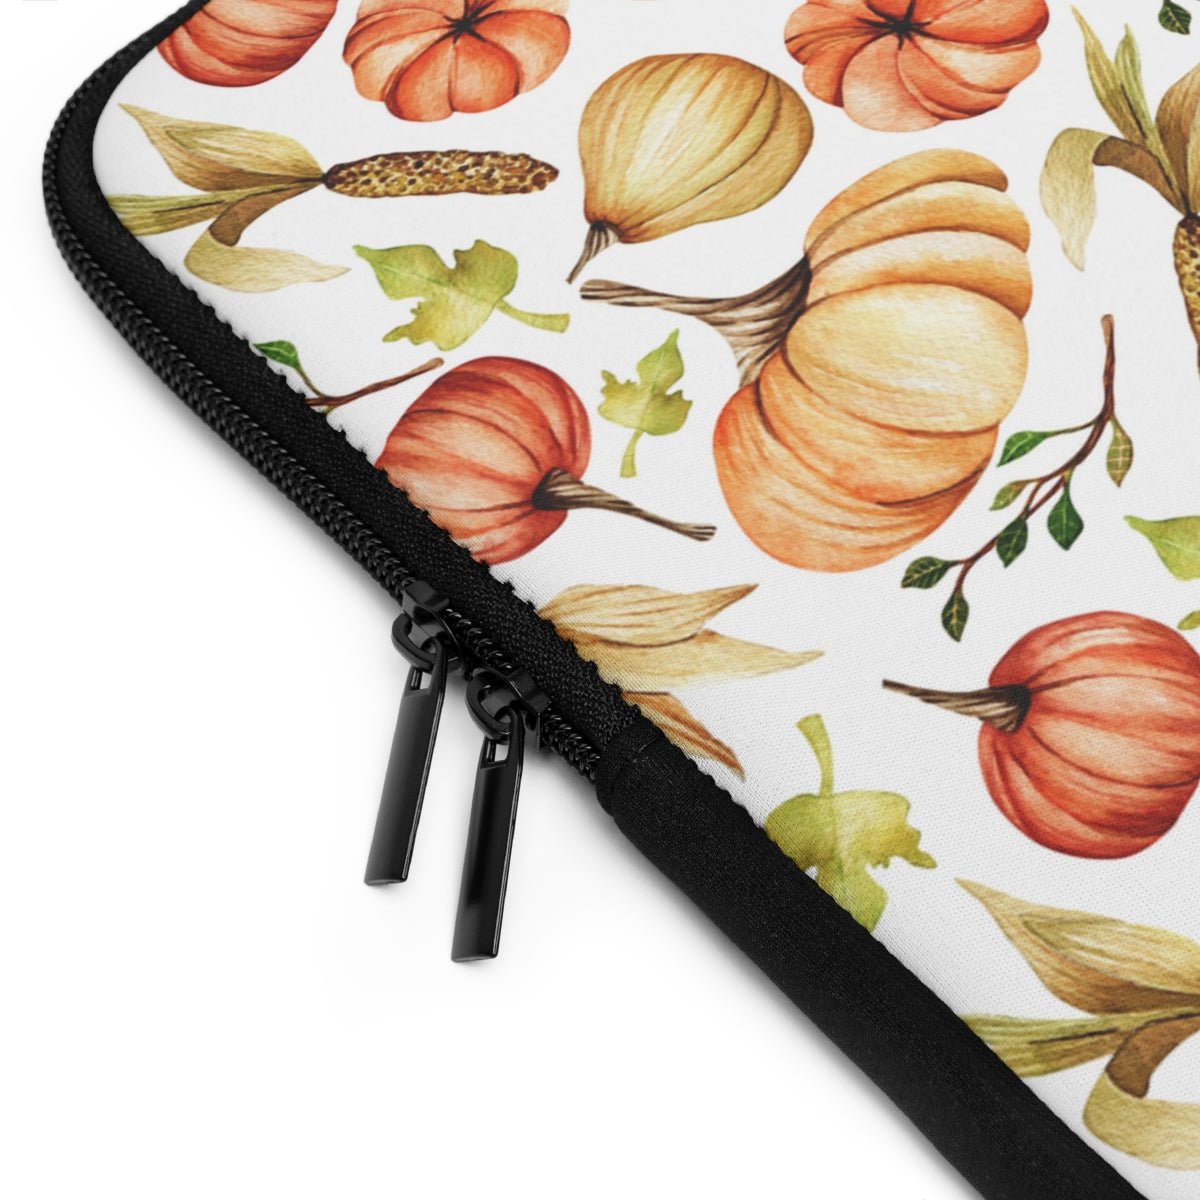 Fall Pumpkins and Corn Laptop Sleeve - Puffin Lime